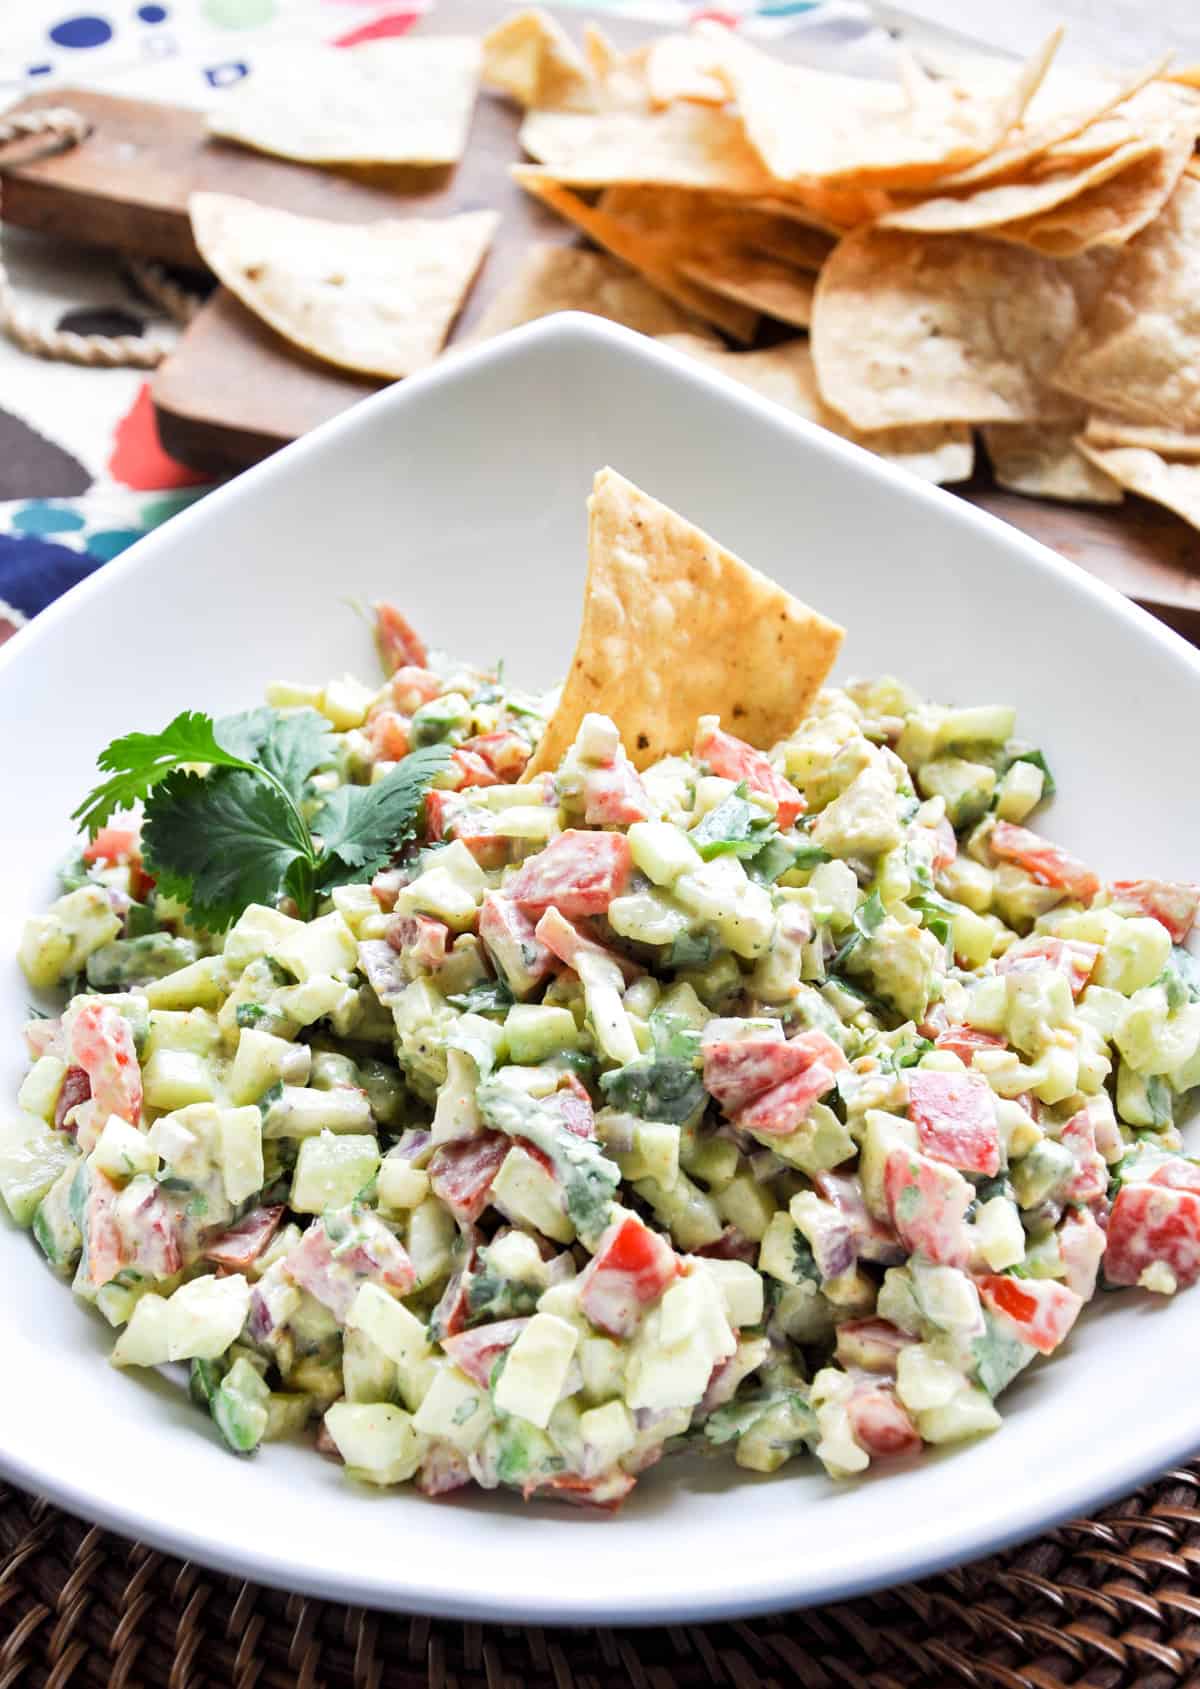 This Creamy Cucumber Salsa is soooooo good! It combines cucumber, tomato, red onion, garlic and avocado with a velvety sour cream mixture. Divine! 